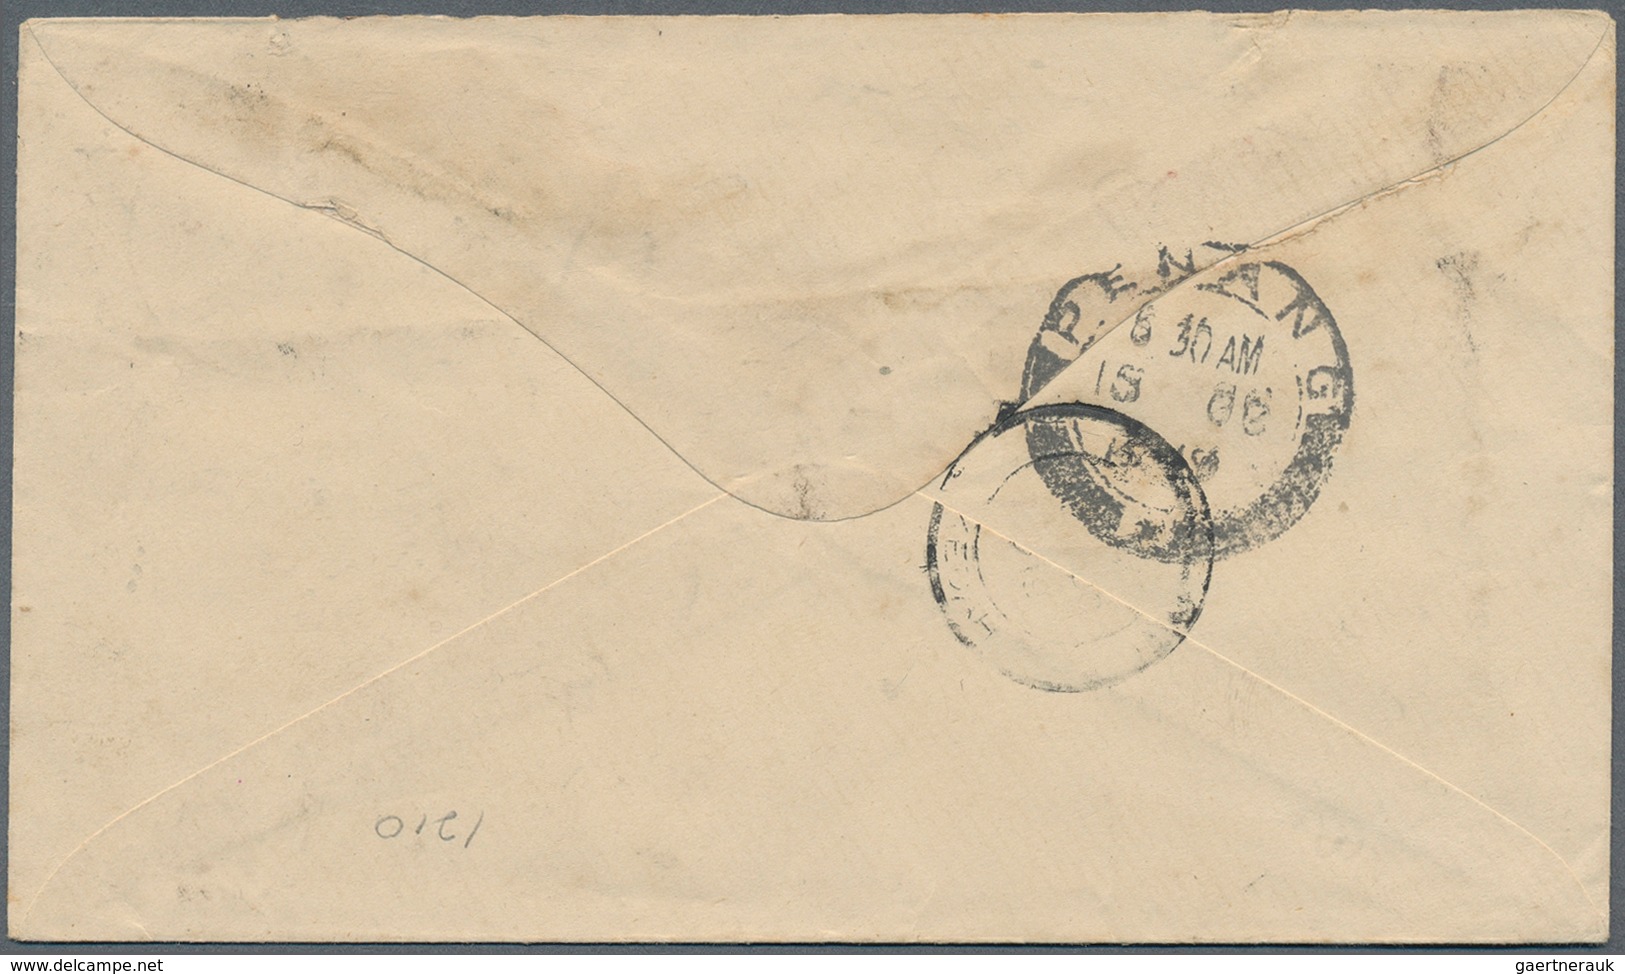 Malaiische Staaten - Perlis: 1919 Cover From Kangar To Penang Franked By Straits KGV. 1c. Black And - Perlis